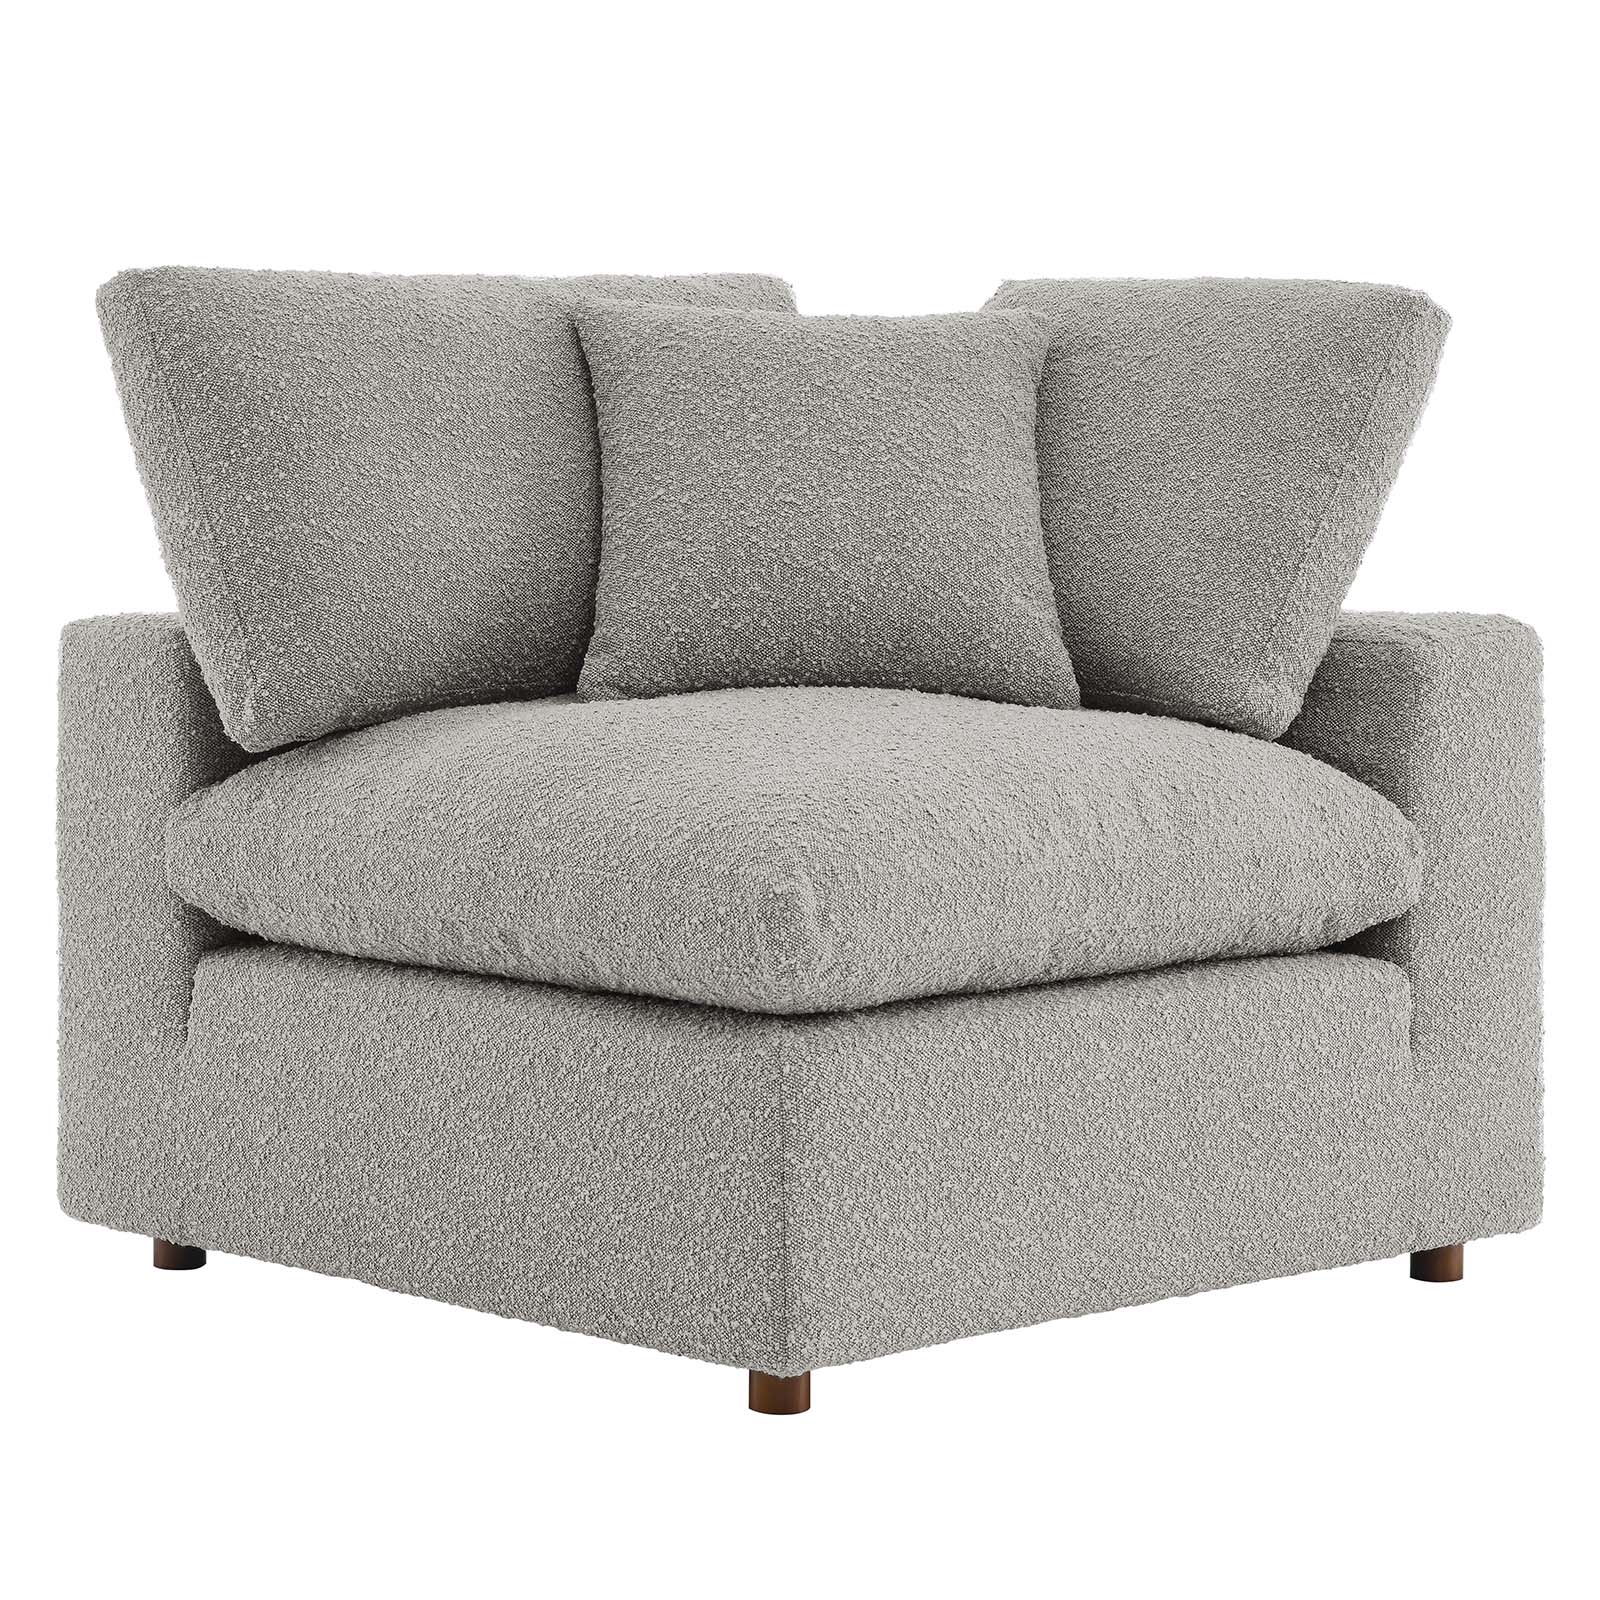 Commix Down Filled Overstuffed Boucle Fabric Corner Chair, Light Gray